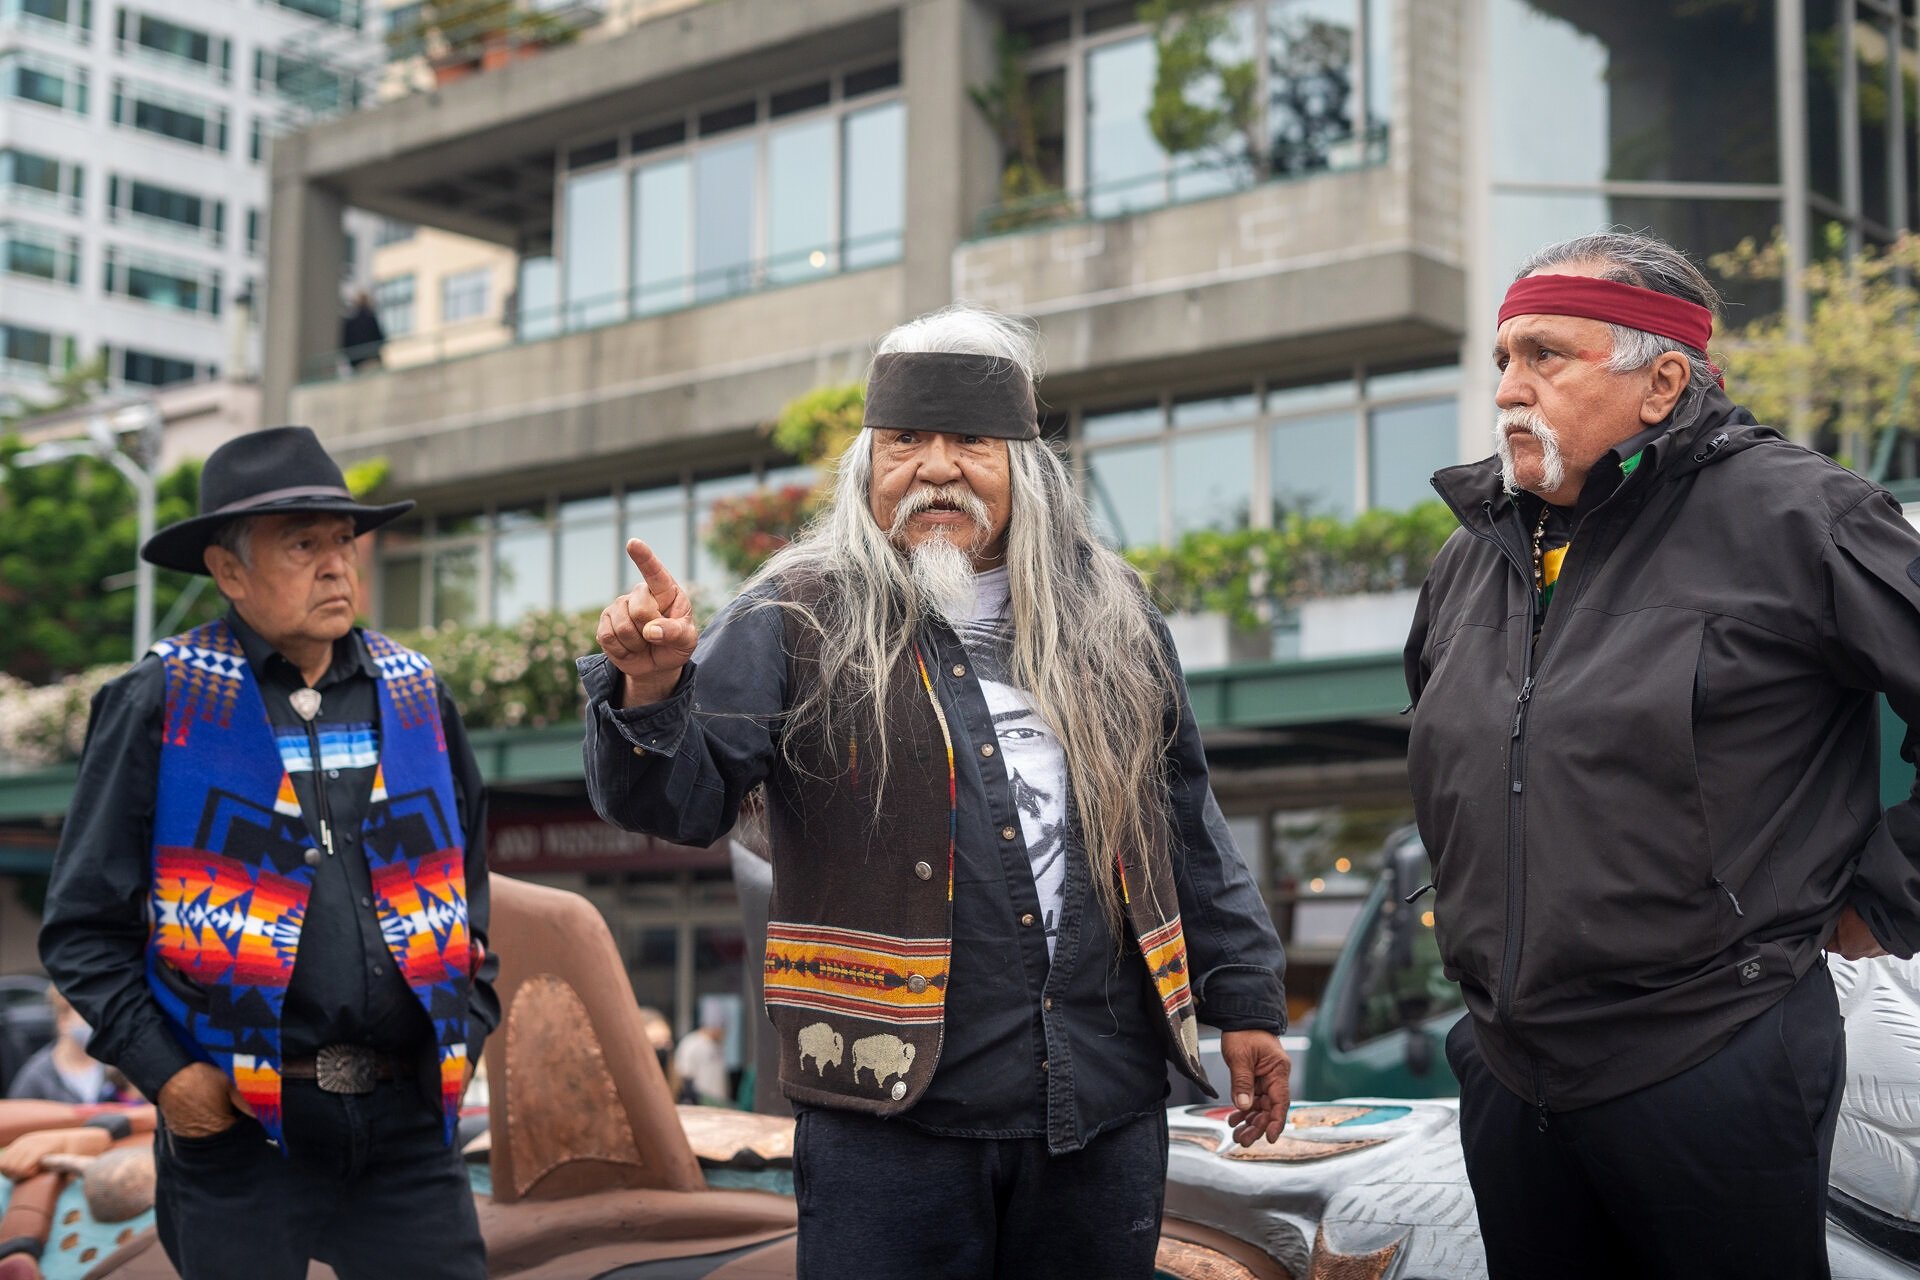  Master carvers from left, Douglas (Sit-ki-kadem) James, Rick Williams, and Jewell Praying Wolf James stand in front of the 24-foot totem pole while addressing the crowd on Saturday, May 22, 2021, outside of Seattle’s Pike Place Market. 